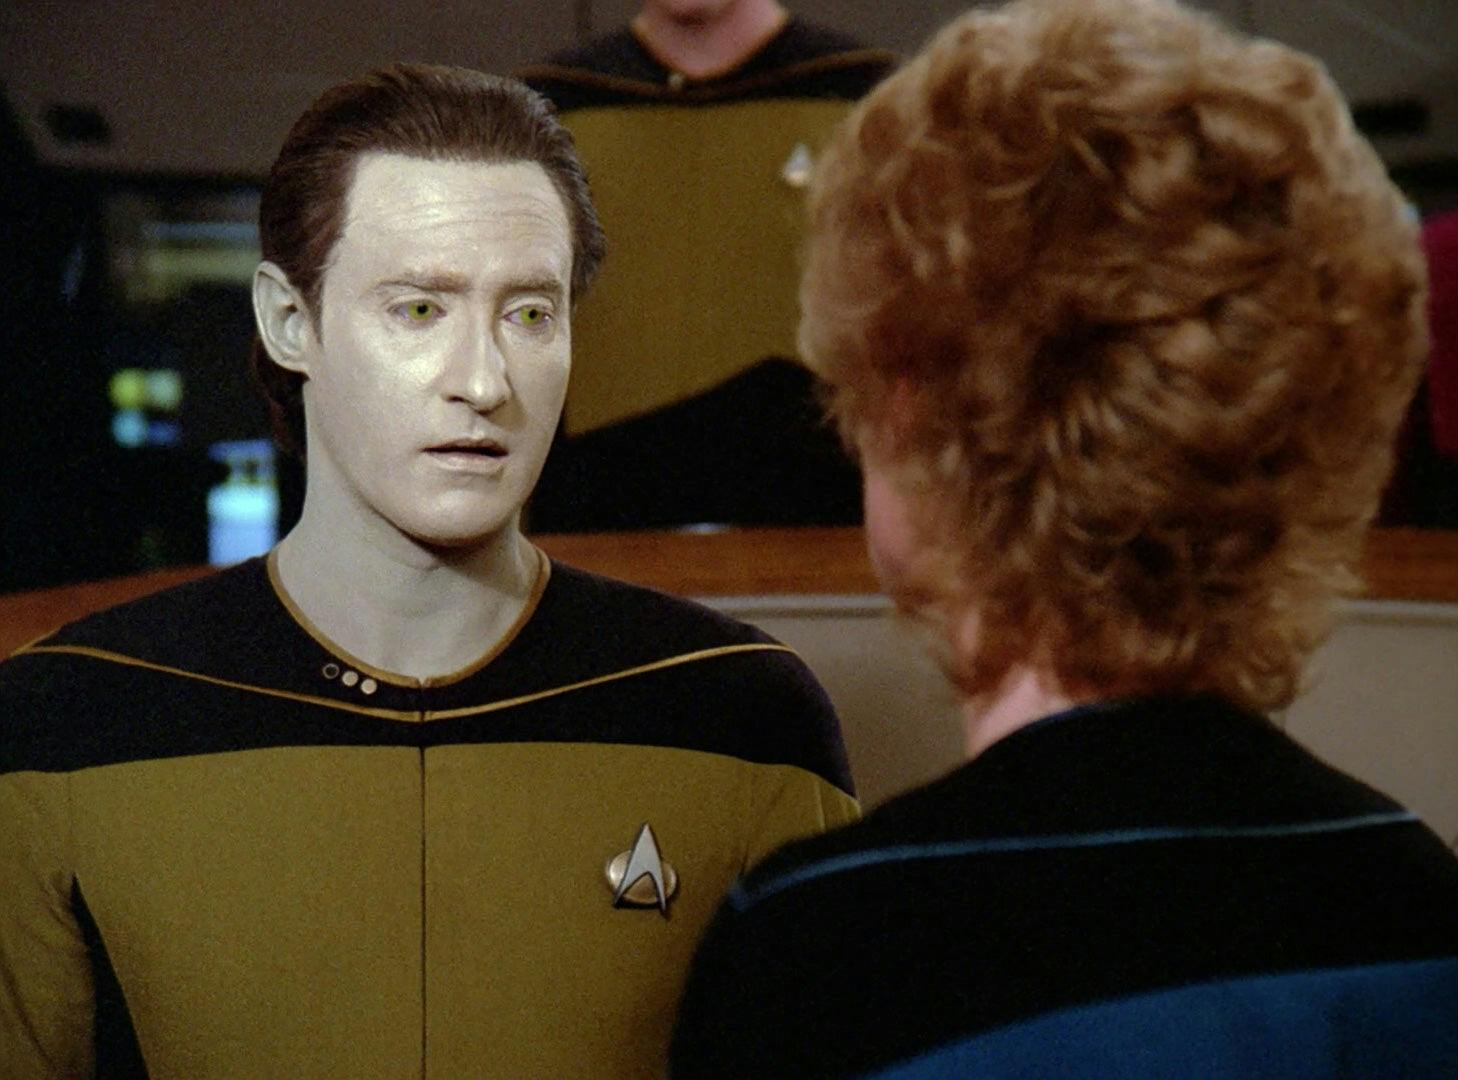 Dr. Pulaski stands in front of Data who looks slight to the right of her on the bridge of the Enterprise in 'Peak Performance'